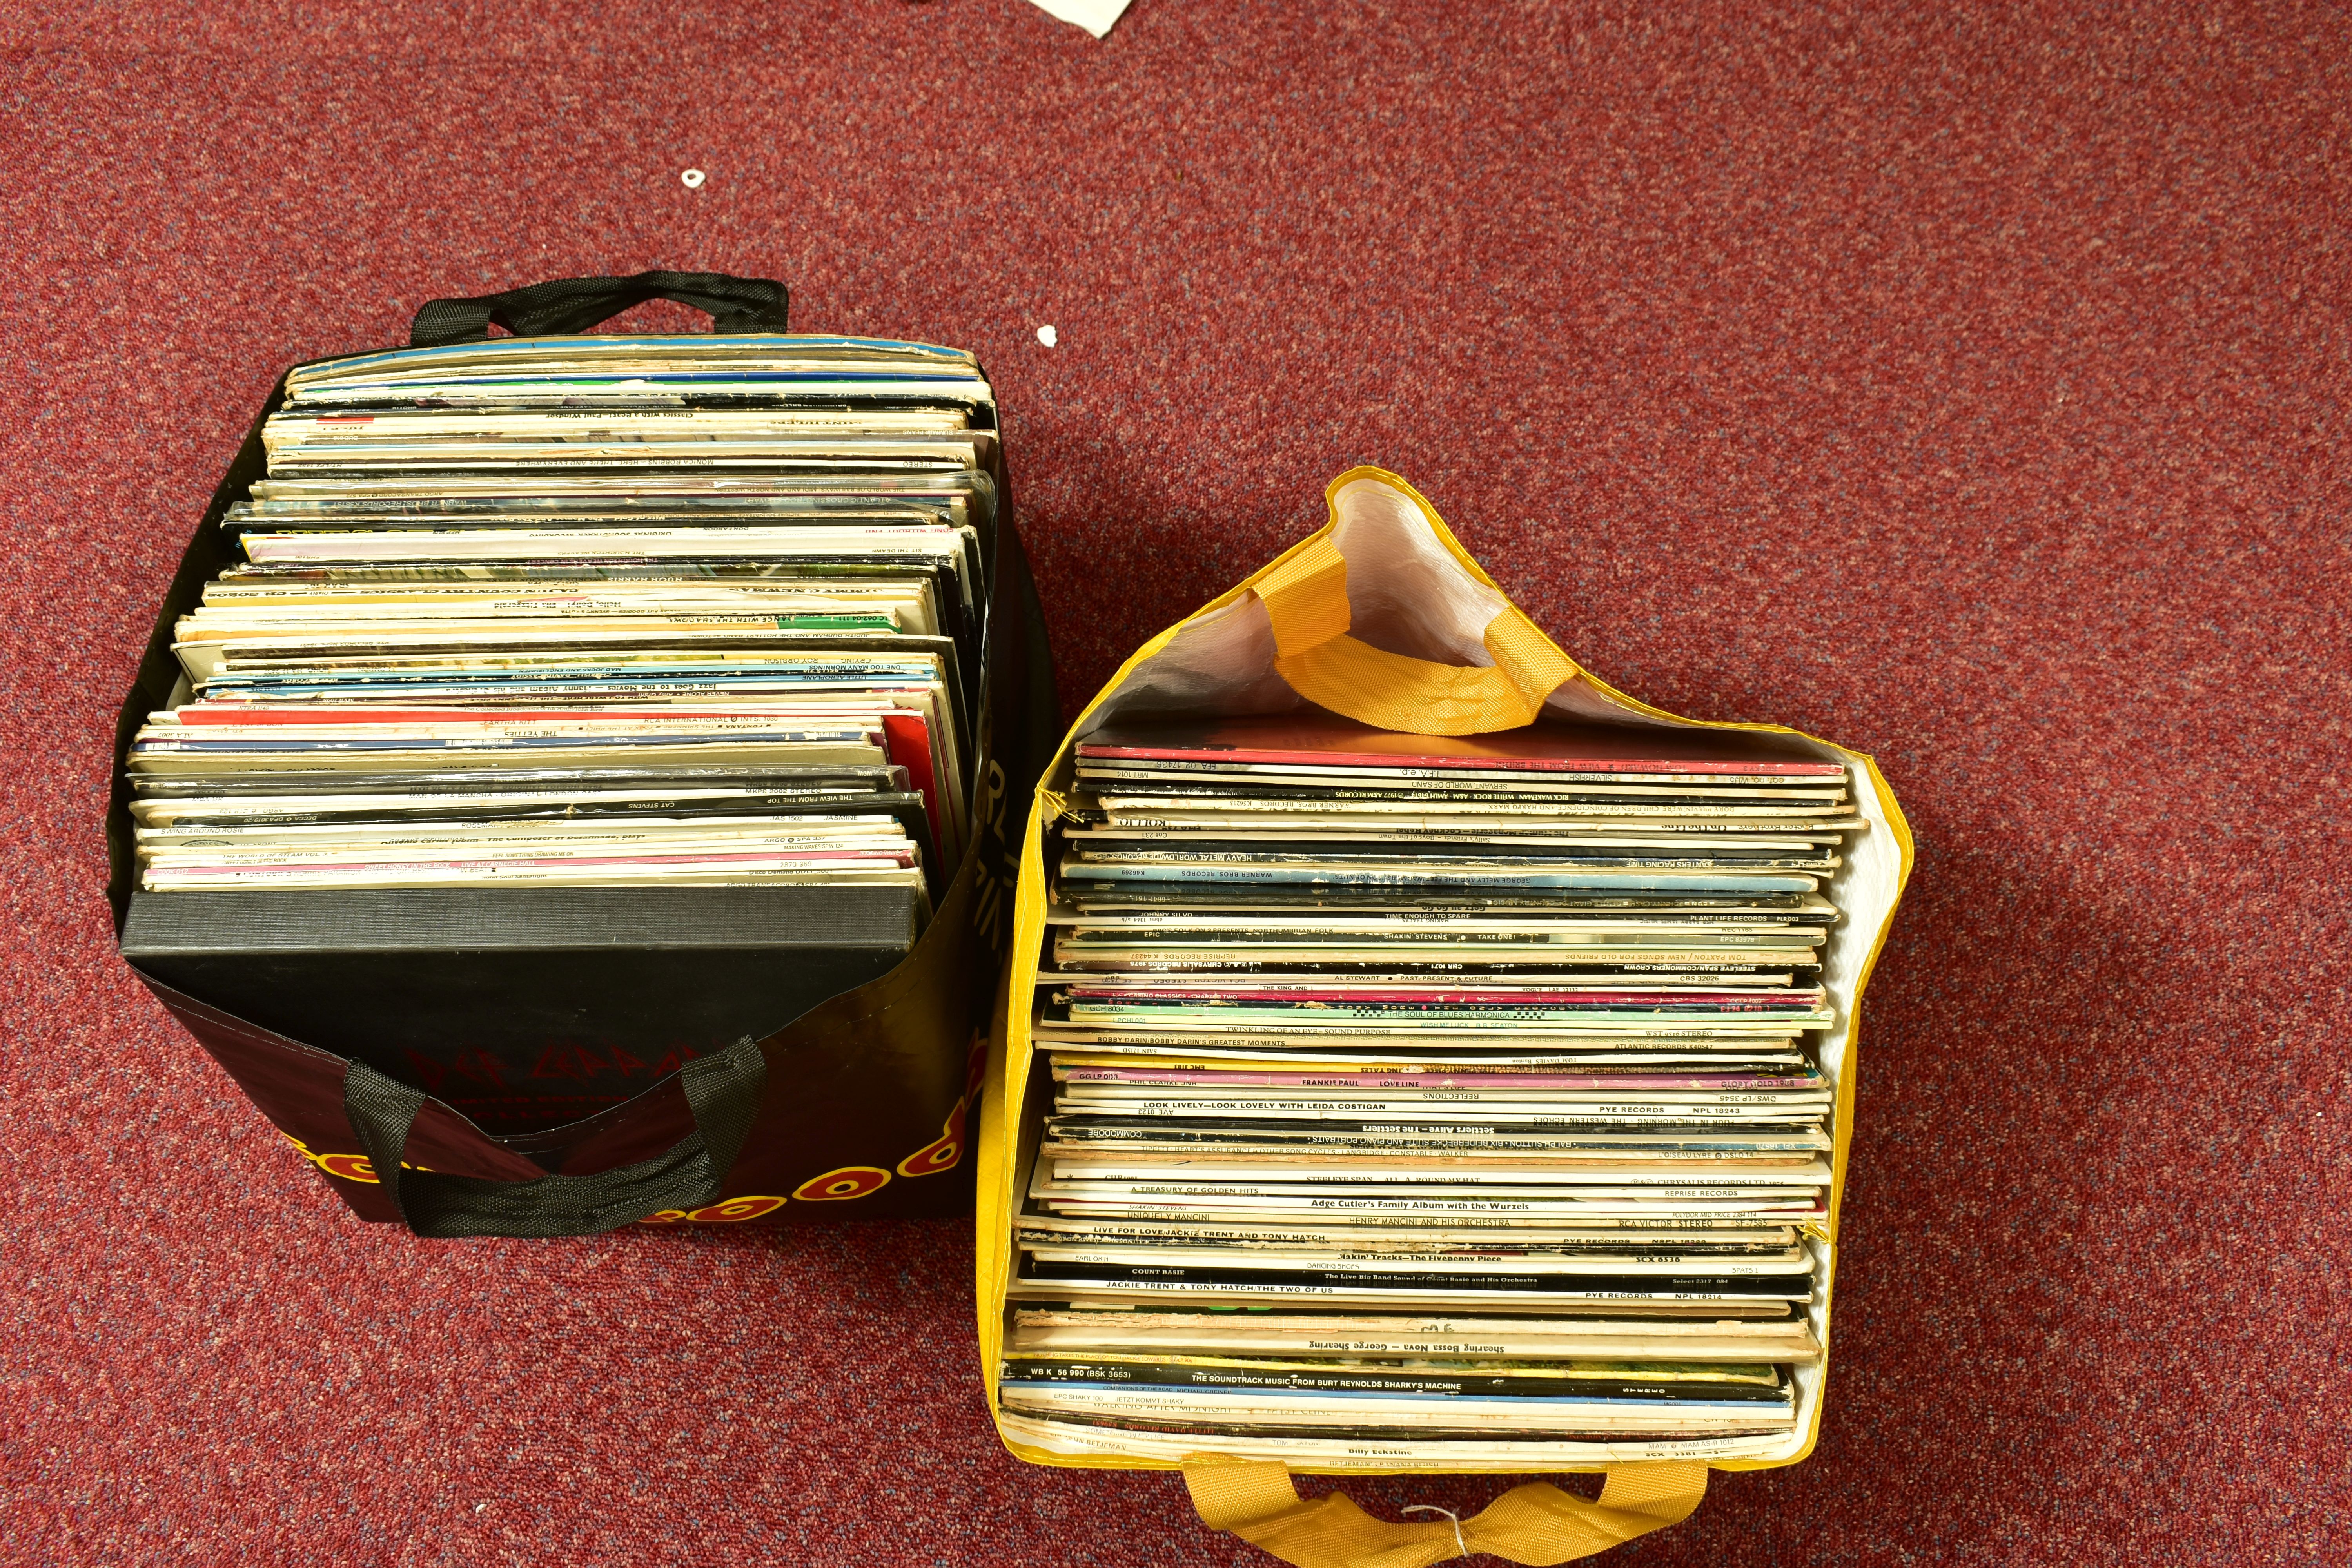 TWO BAGS CONTAINING OVER ONE HUNDRED AND FIFTY LPs by artists such as Cream, Jimmy Ruffin, Mamas and